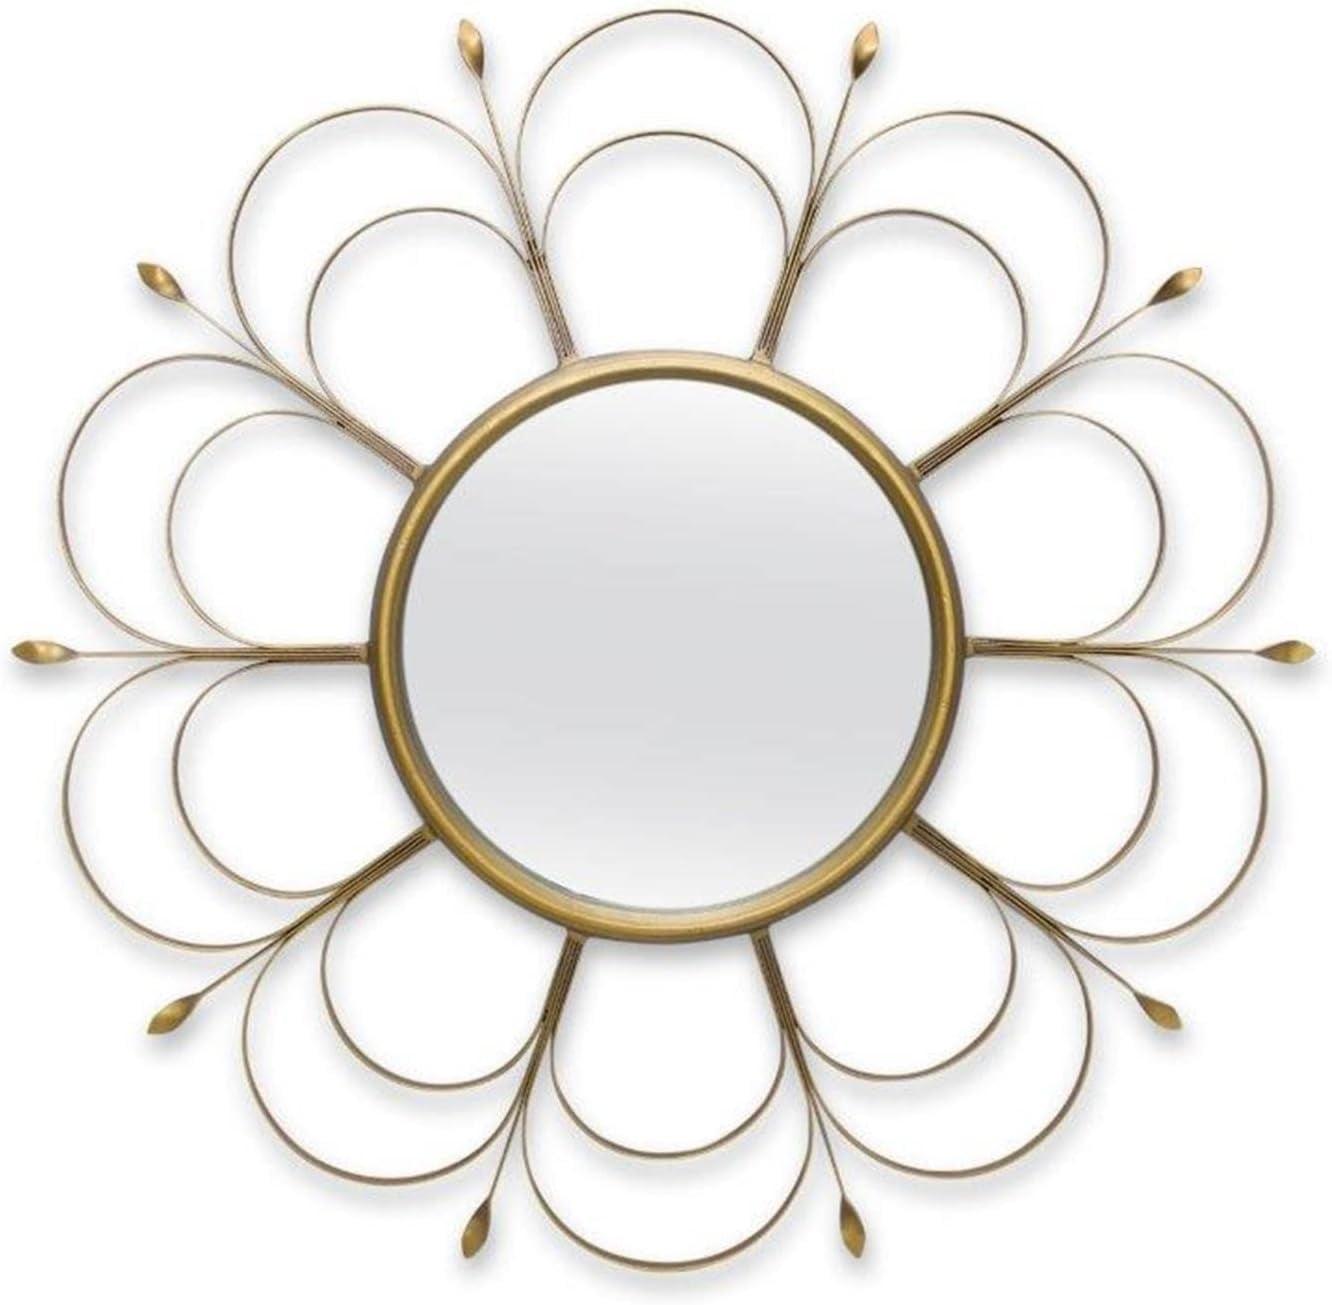 24" Round Gold-Toned Metal Wall Decor